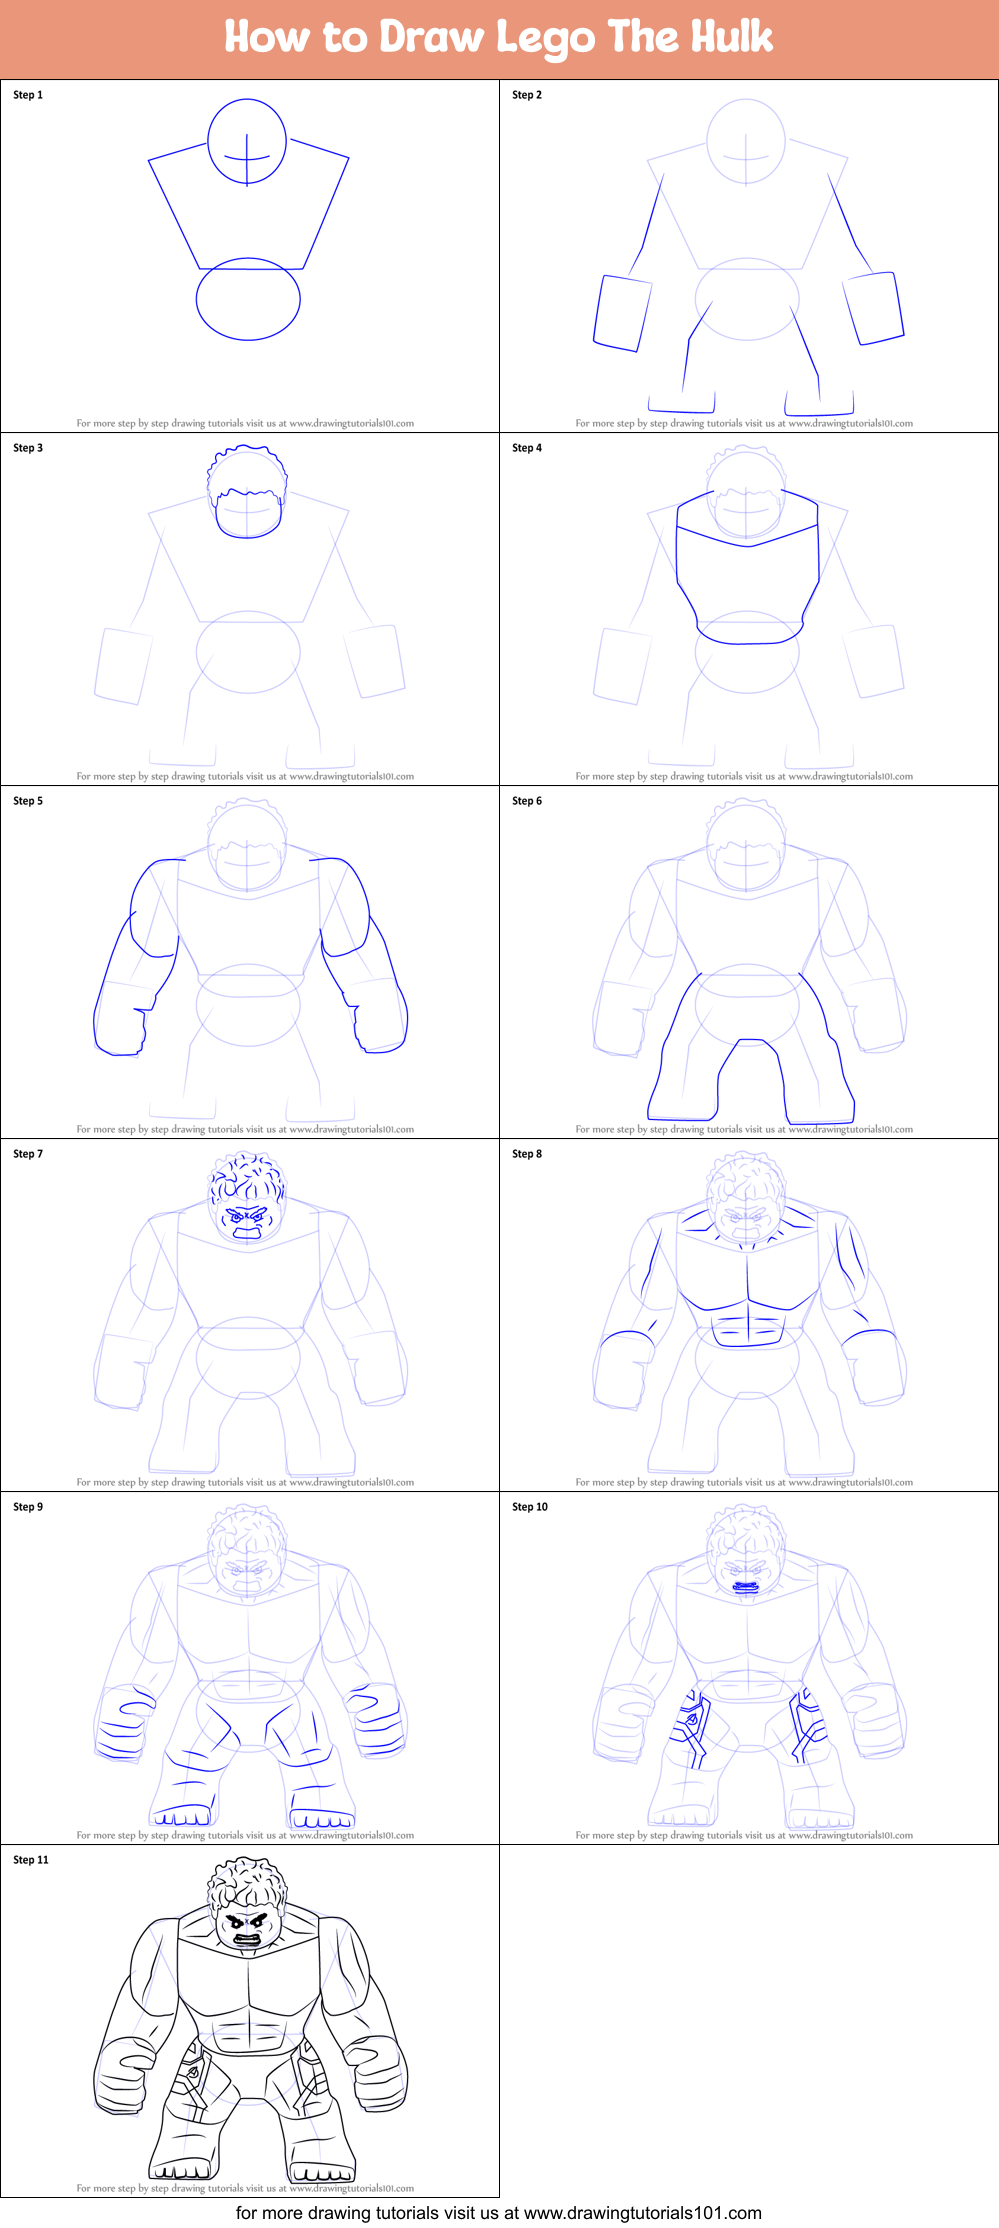 to Draw Lego The Hulk printable step by step drawing sheet : DrawingTutorials101.com